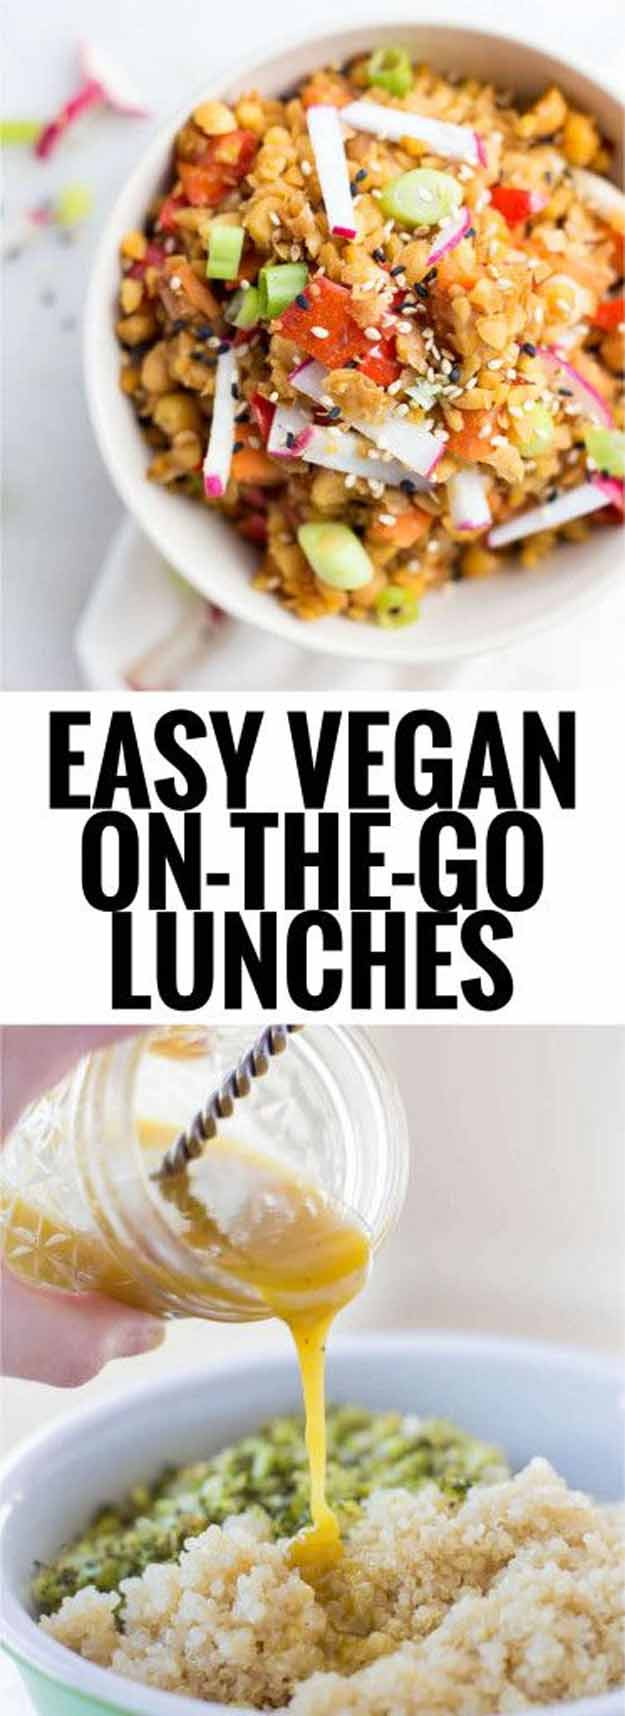 Easy Vegan Lunches For Work
 35 More Healthy Lunches For Work The Goddess